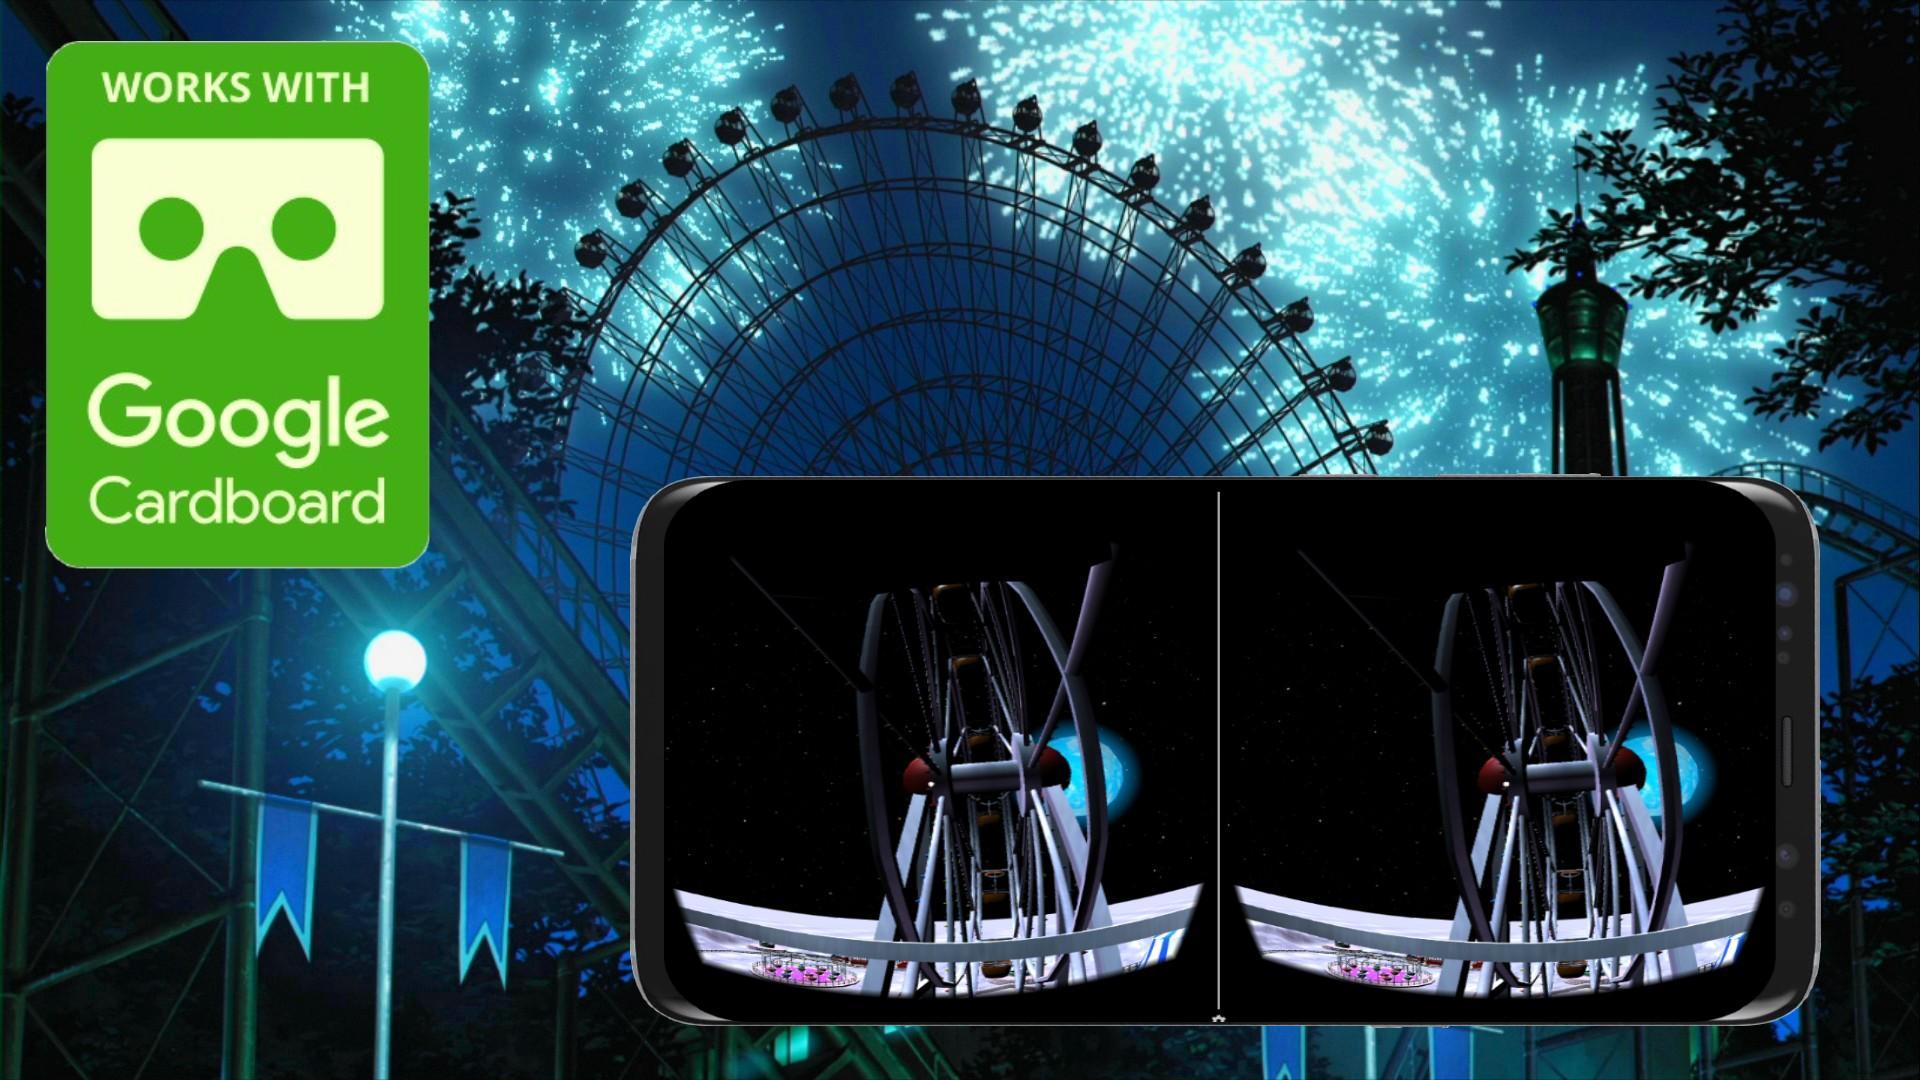 Mega Vr Live Theme Park Into The Galaxy For Android Apk Download